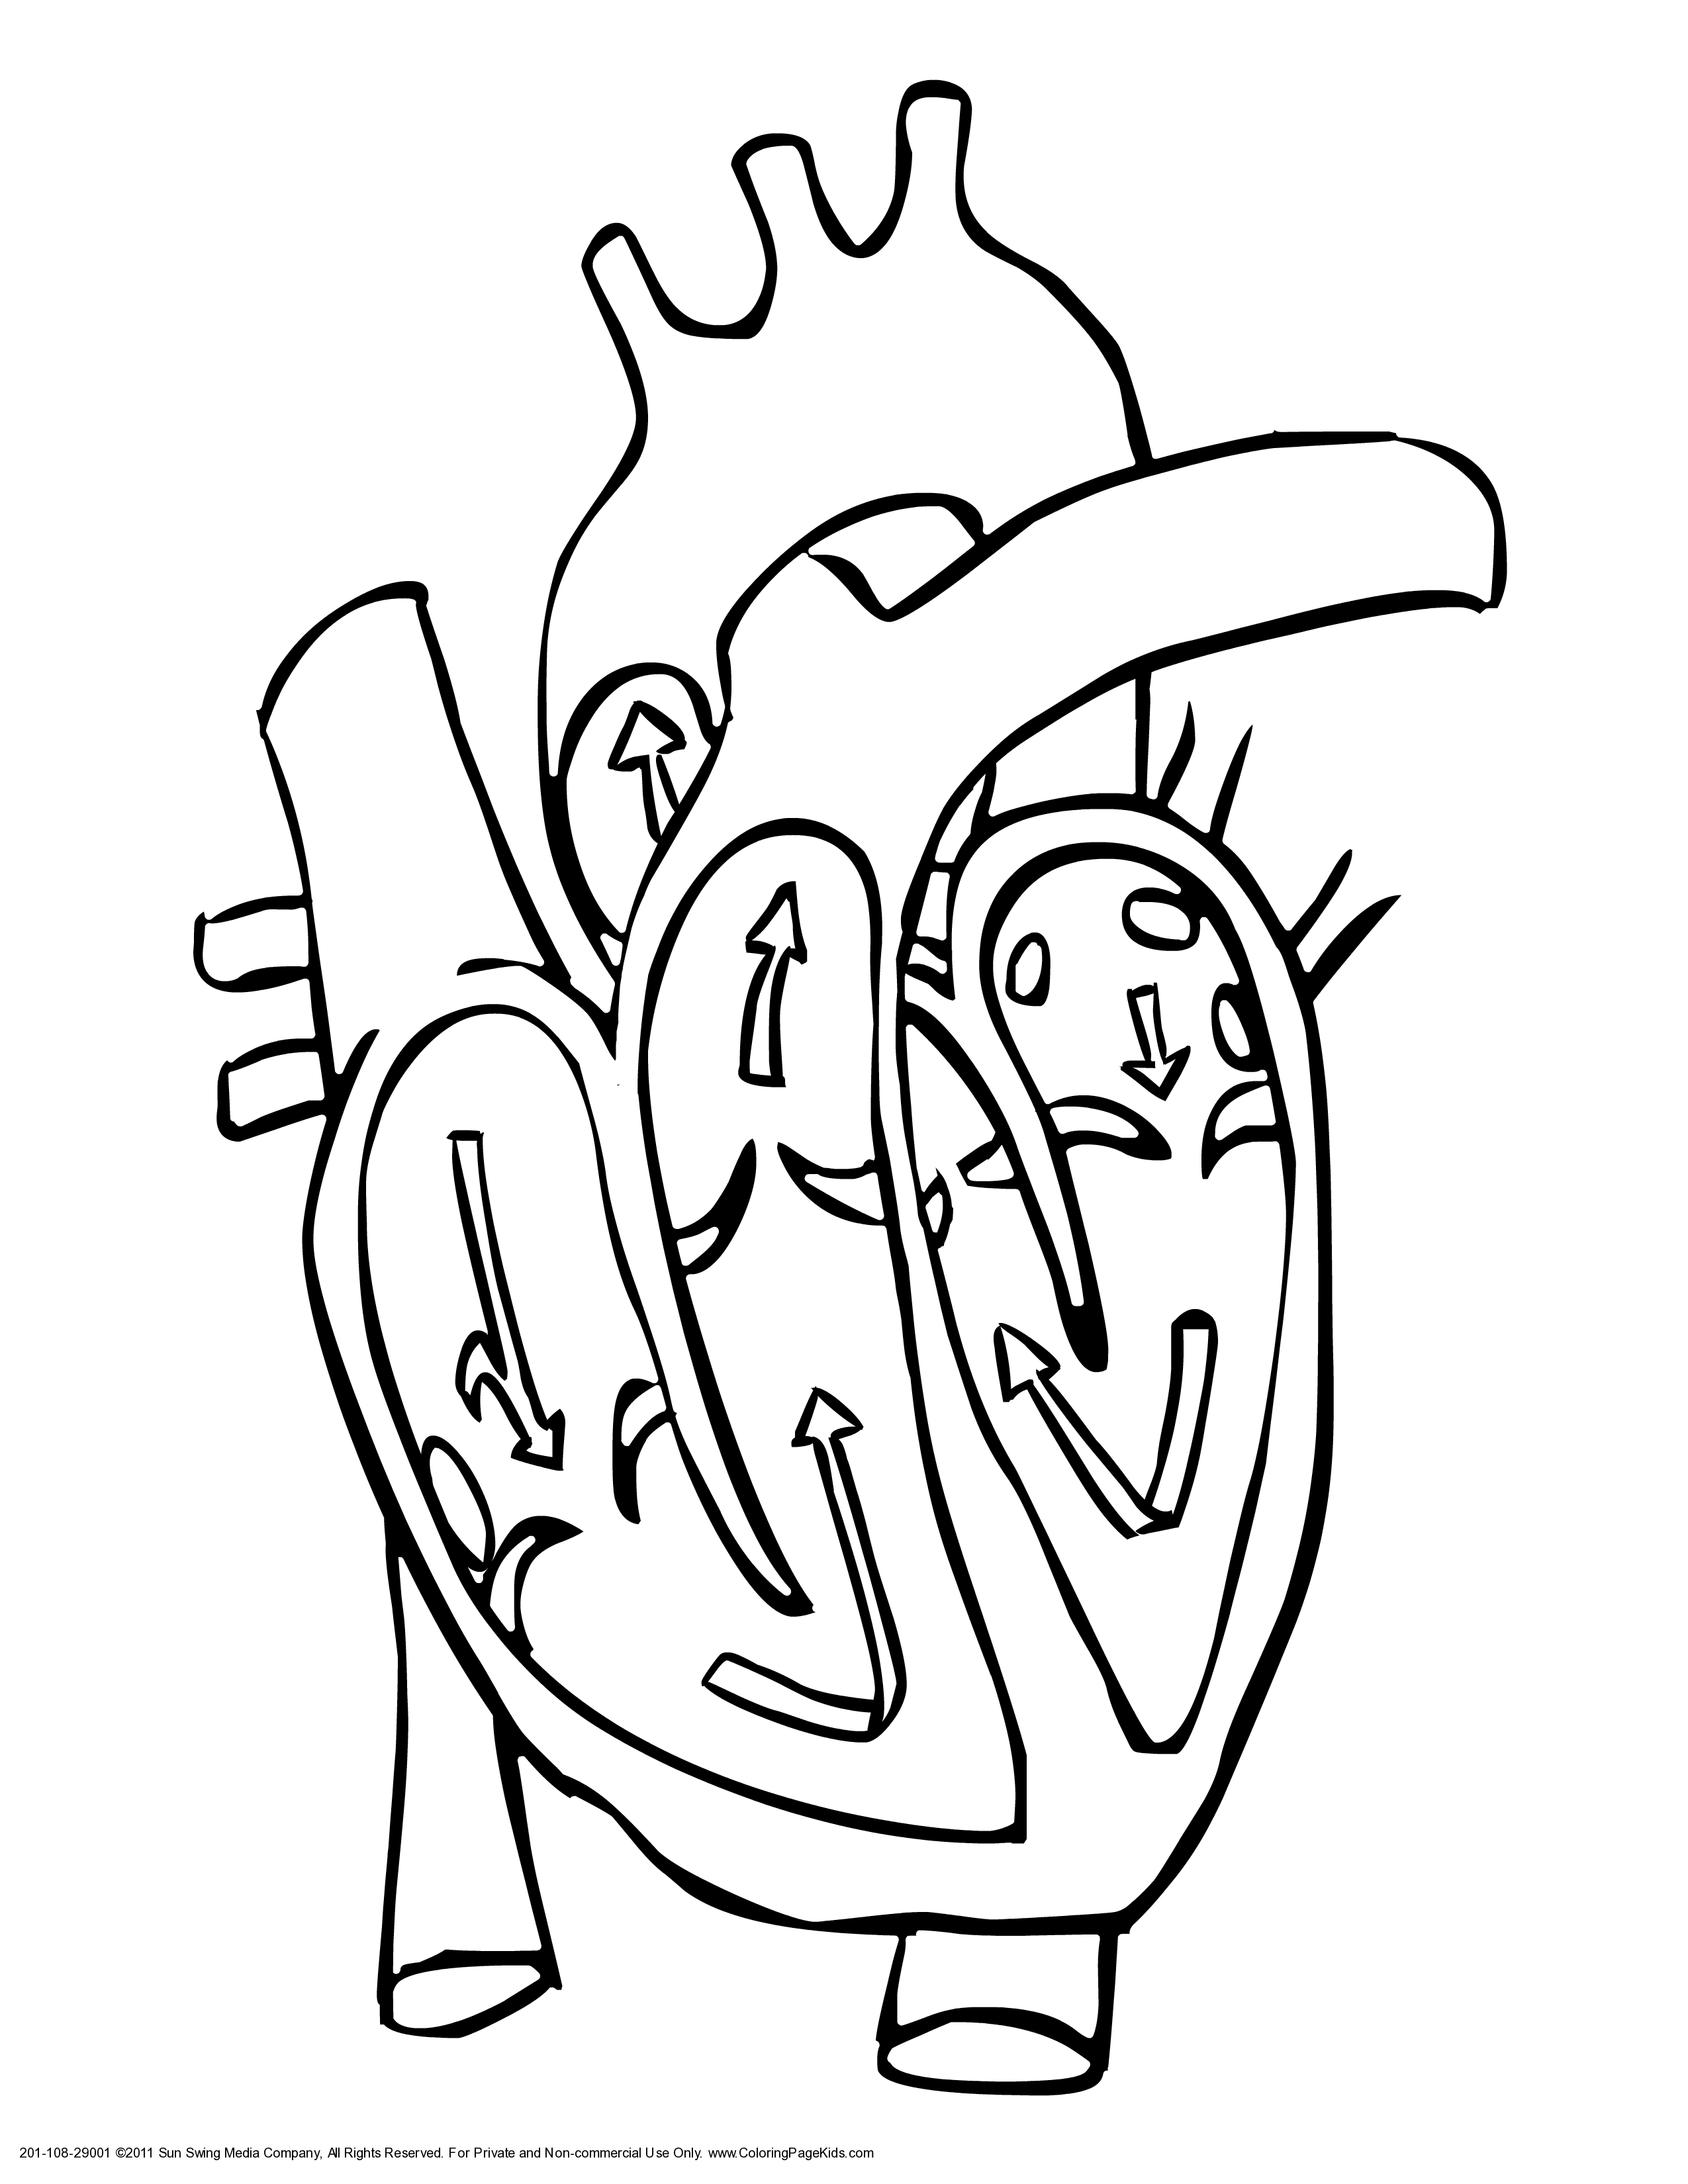 Human Heart Diagram Unlabeled - Clipart library - Clipart library